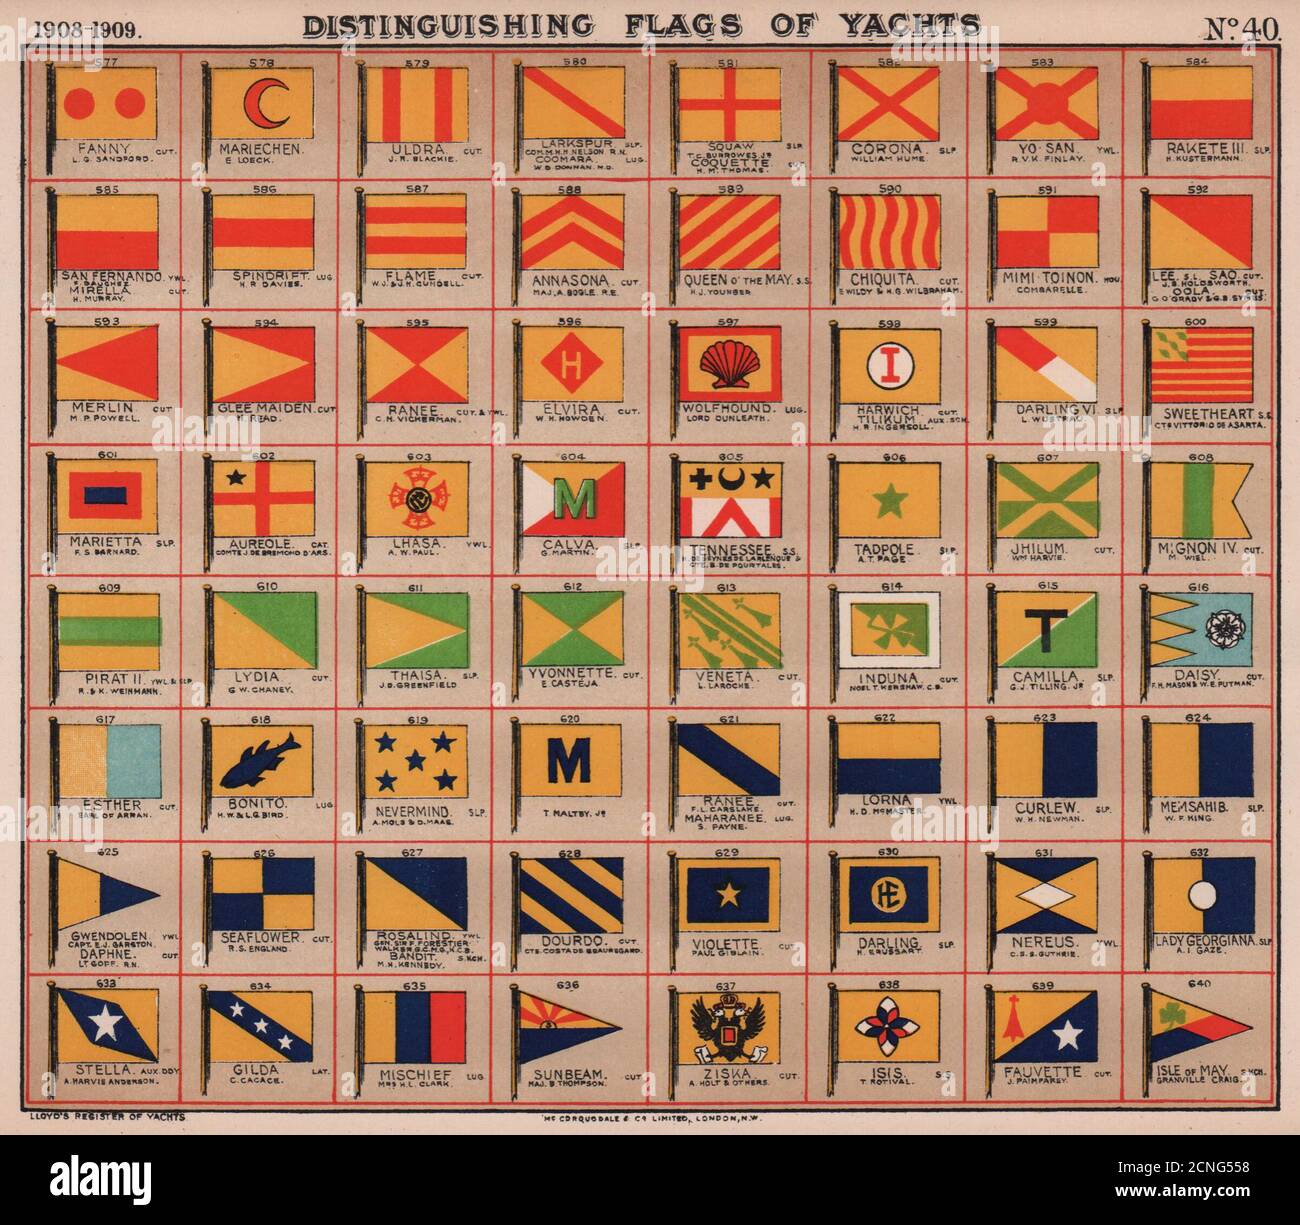 YACHT FLAGS. Red & yellow. Blue & Yellow. Yellow & Green. Turquoise 1908 print Stock Photo